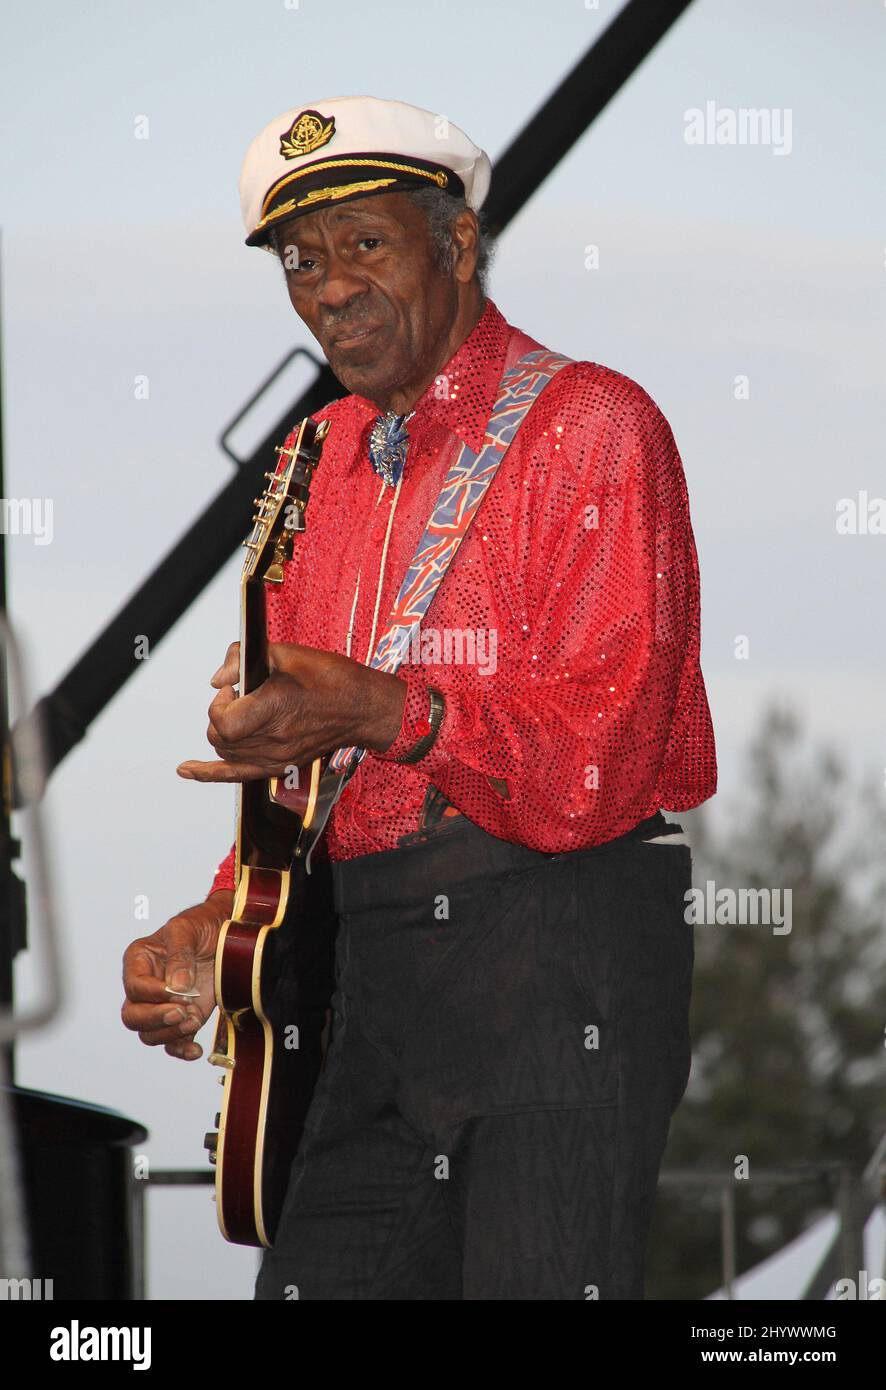 Chuck Berry in concert at the Viva Las Vegas Rockabilly Festival held at the Orleans Hotel & Casino, Las Vagas Stock Photo